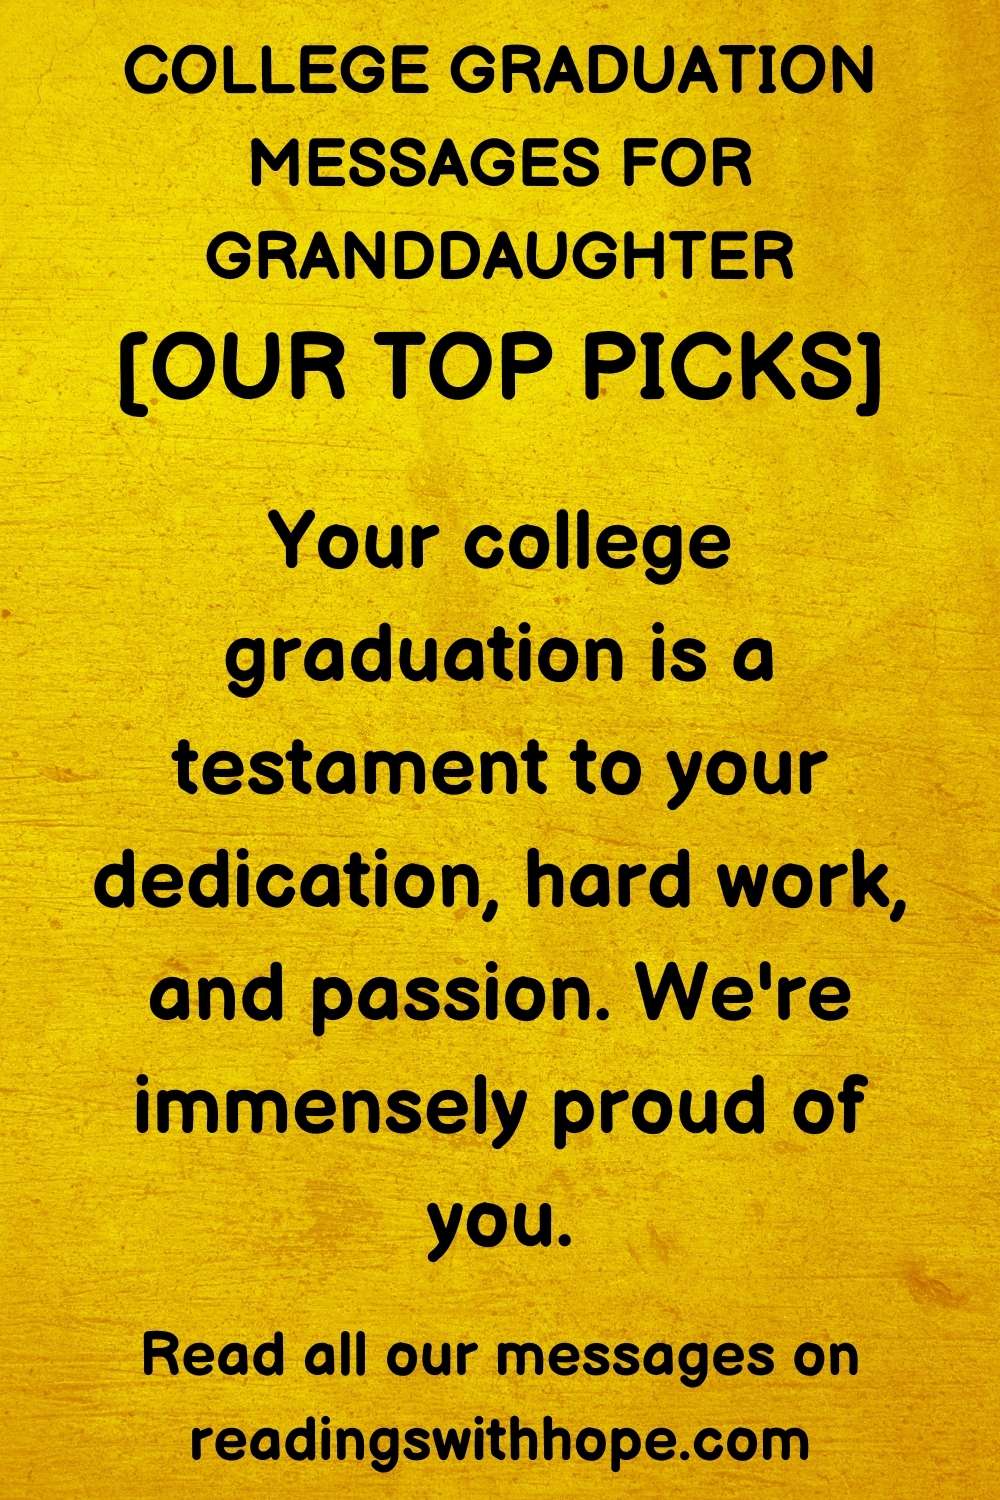 college graduation messages for granddaughter that says "Your college graduation is a testament to your dedication, hard work, and passion. We're immensely proud of you."